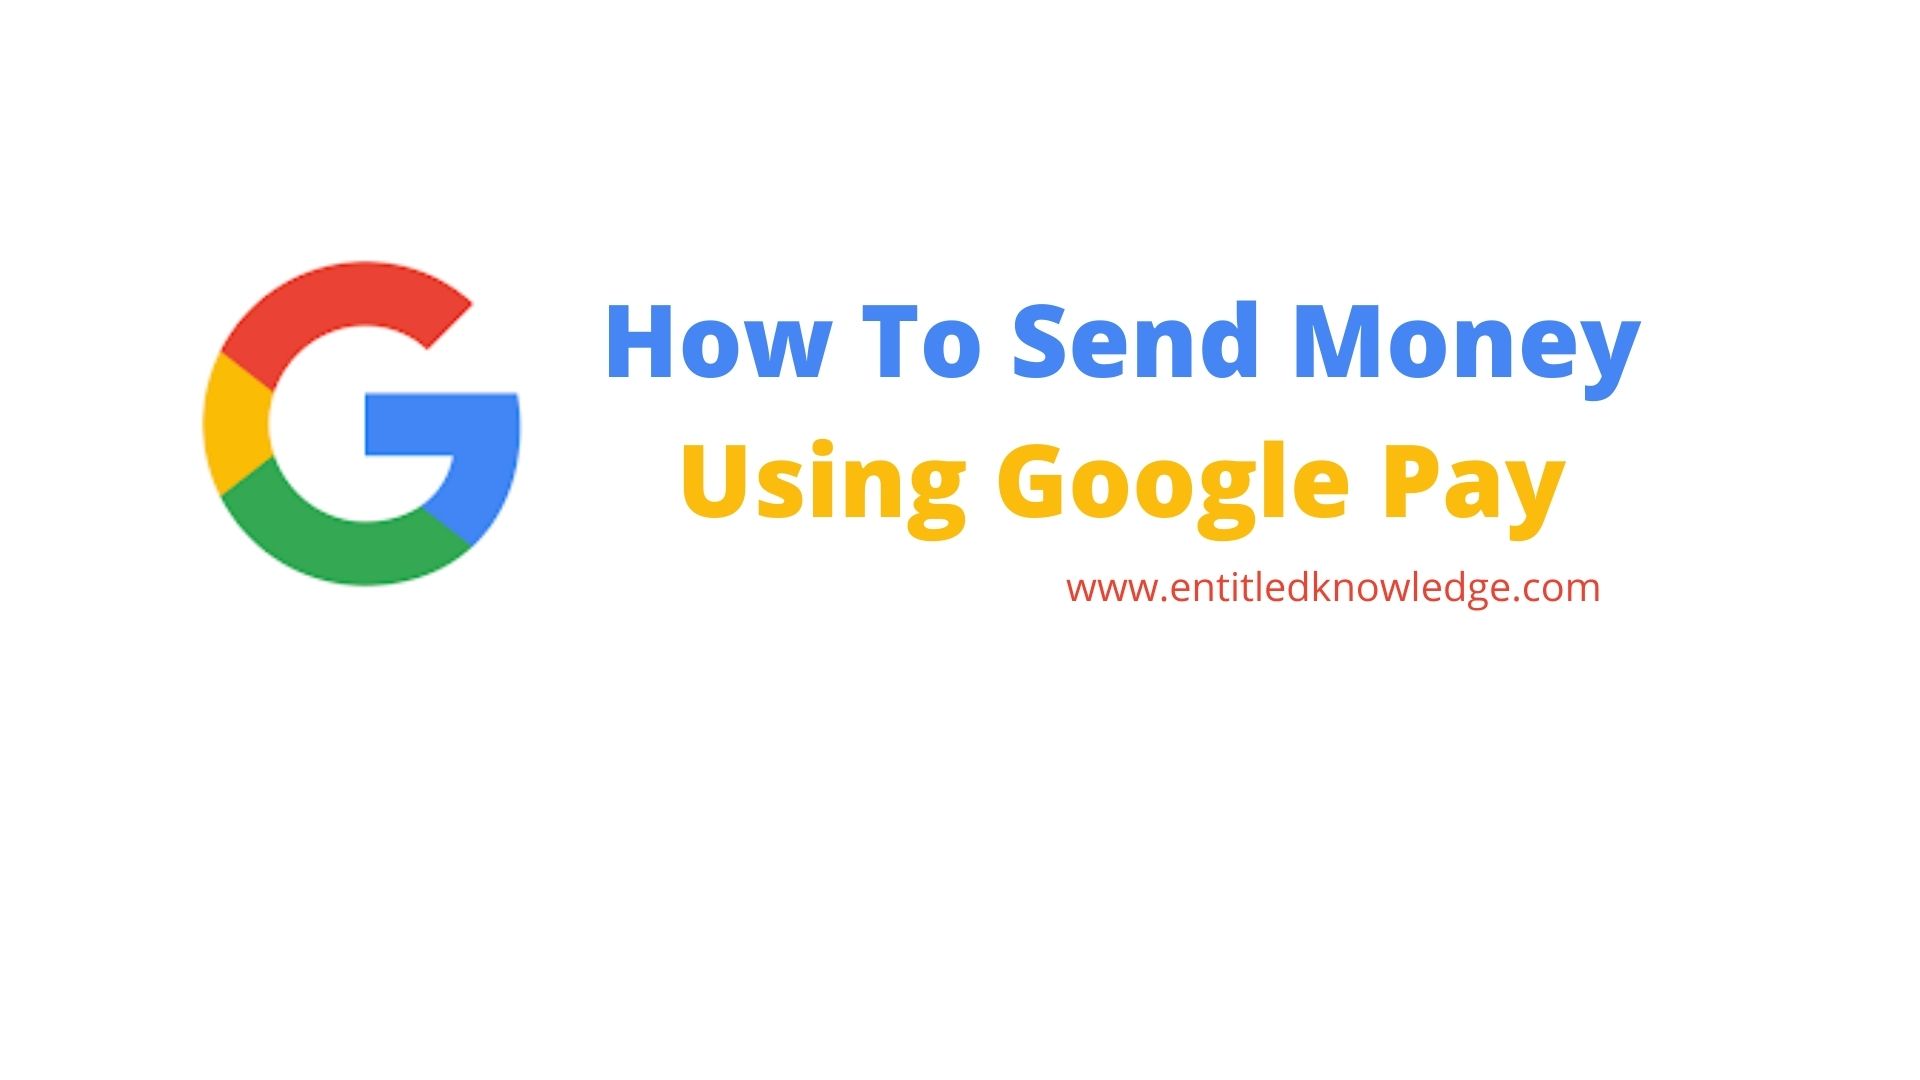 How To Send Money Using Google Pay ( Step by Step Guide )